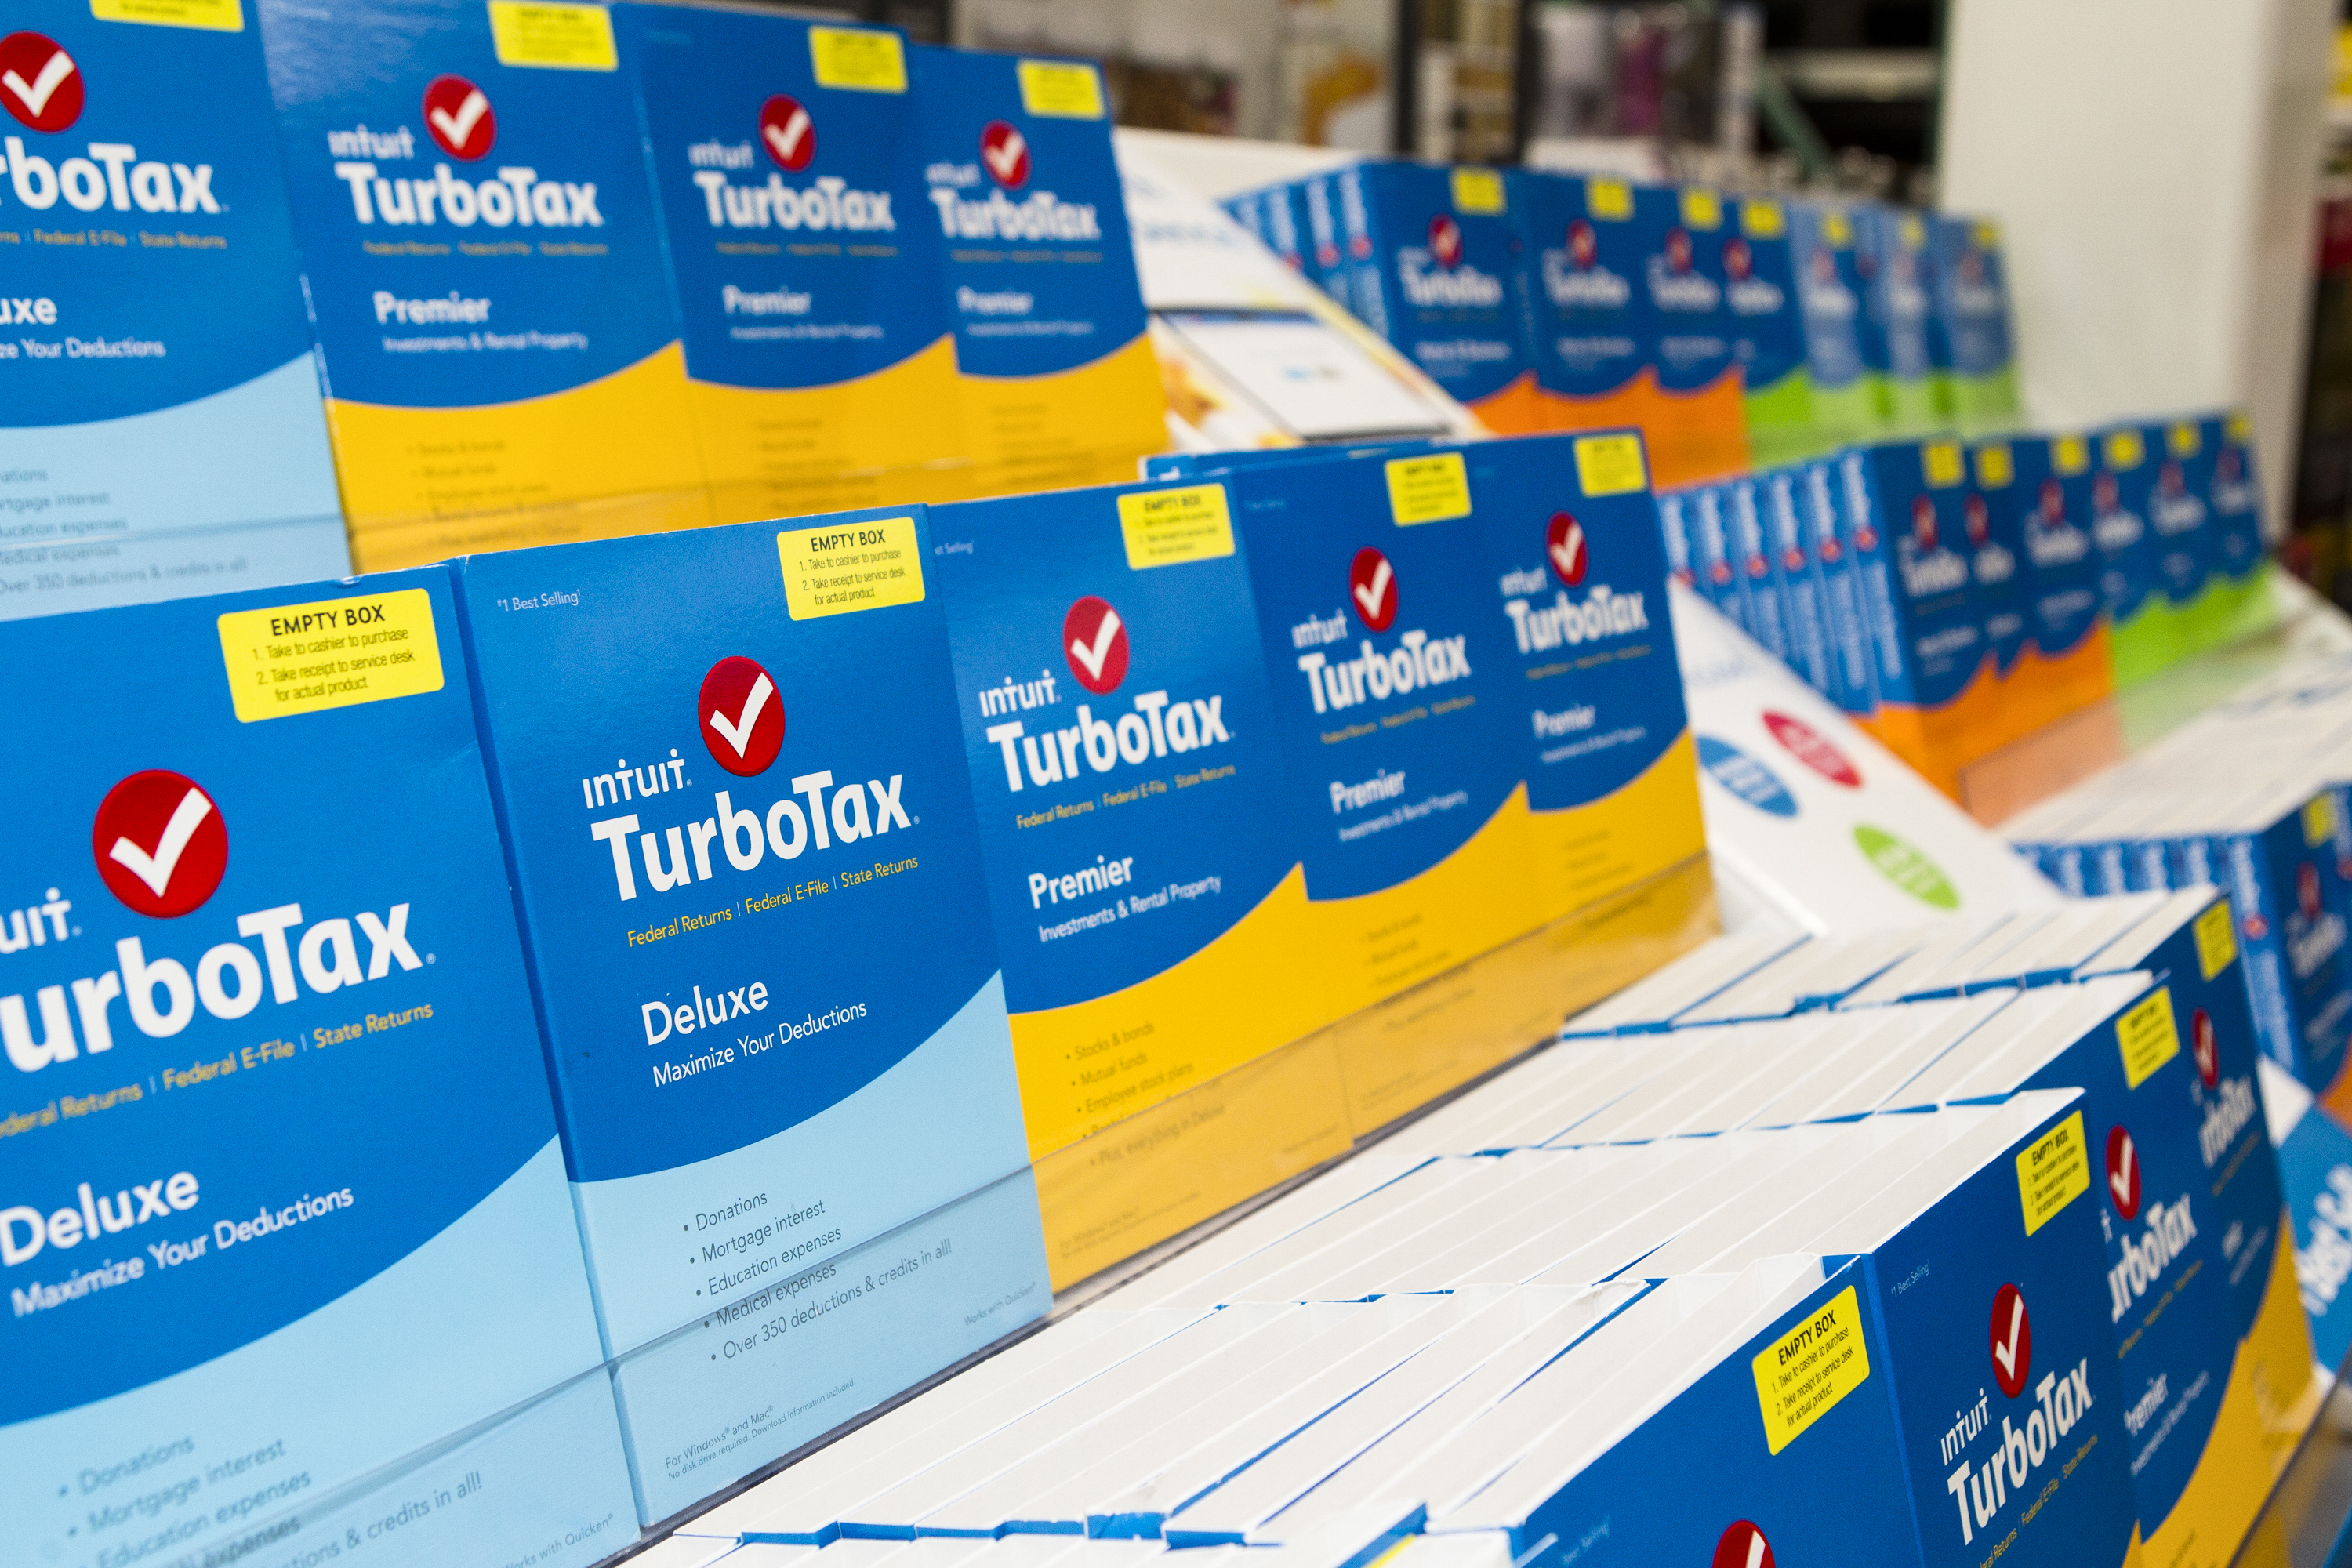 Turbotax Stimulus Update As Users Report Issues With Receiving Checks